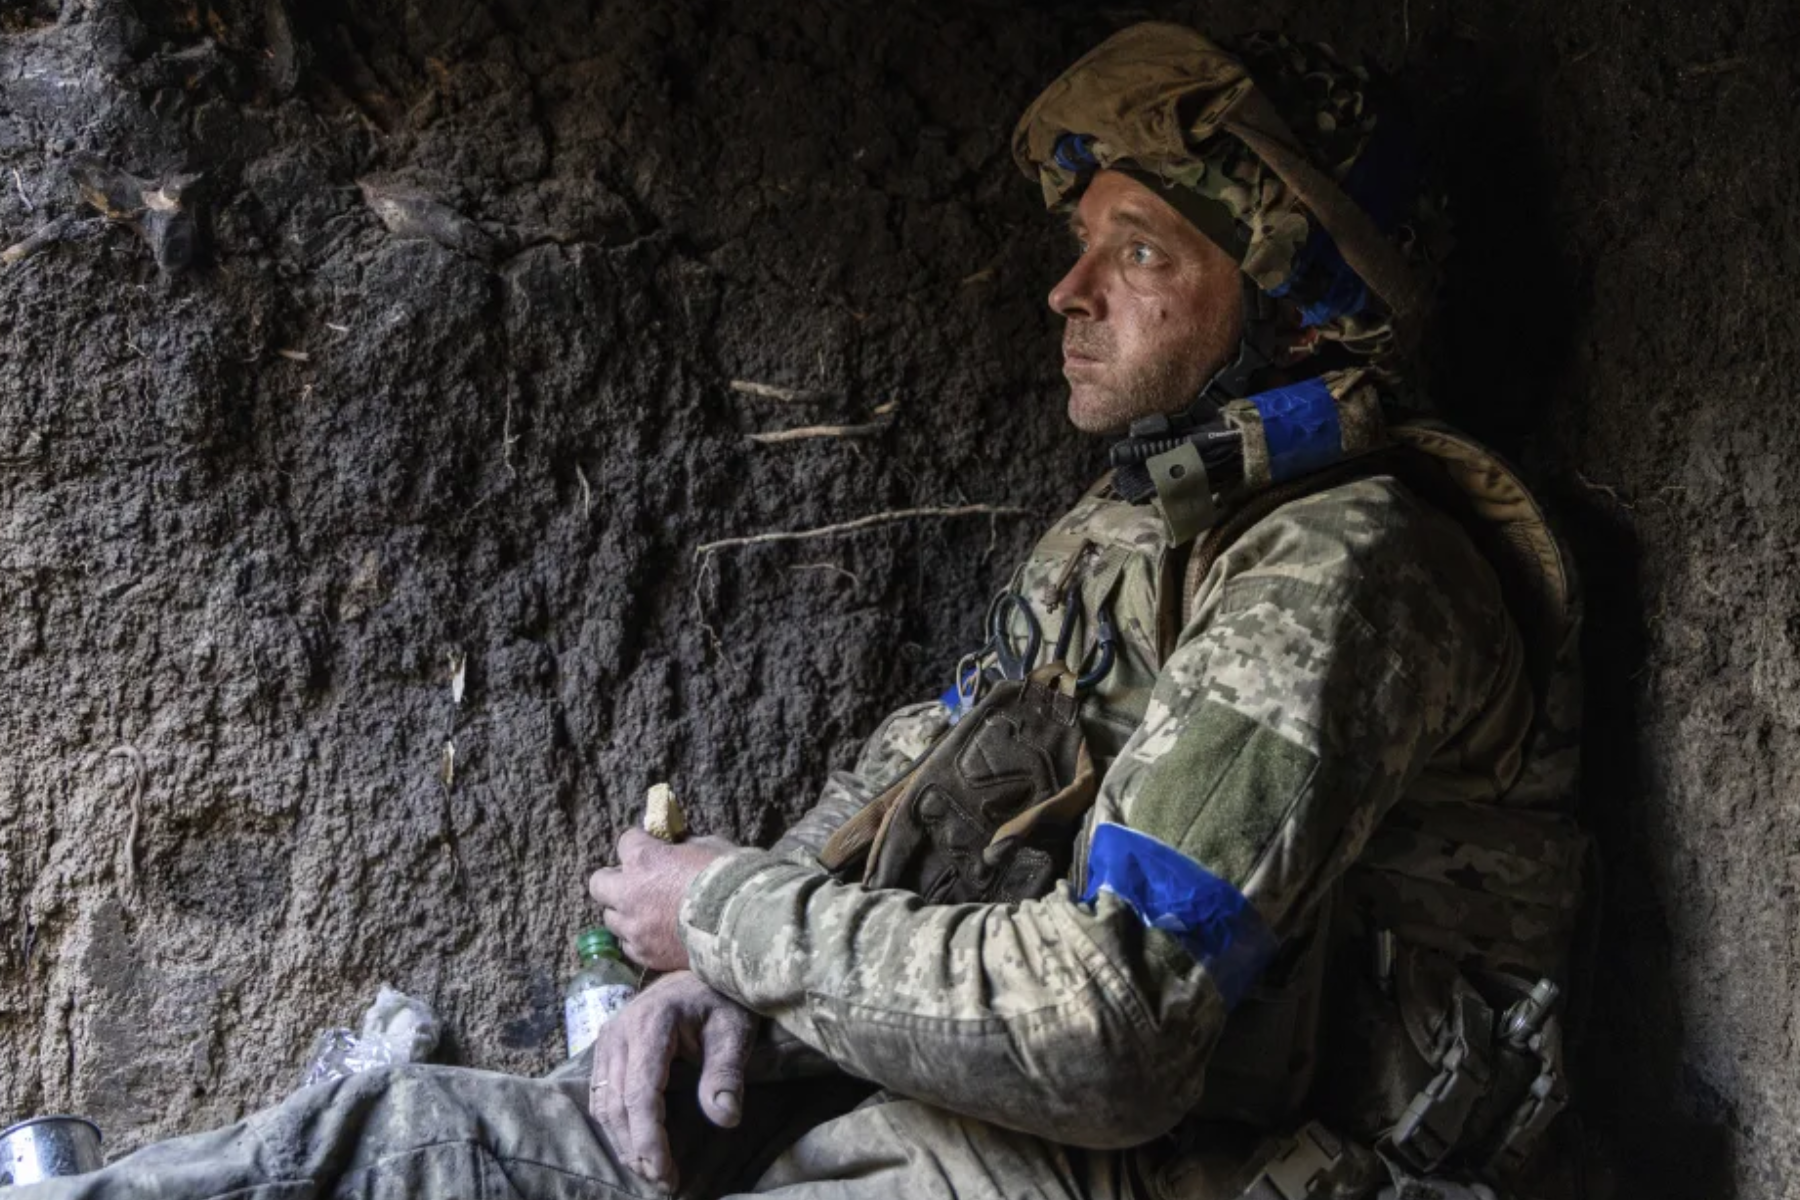 A Ukrainian serviceman from the 3rd Assault Brigade known as 'Sheva' eats a slice of bread